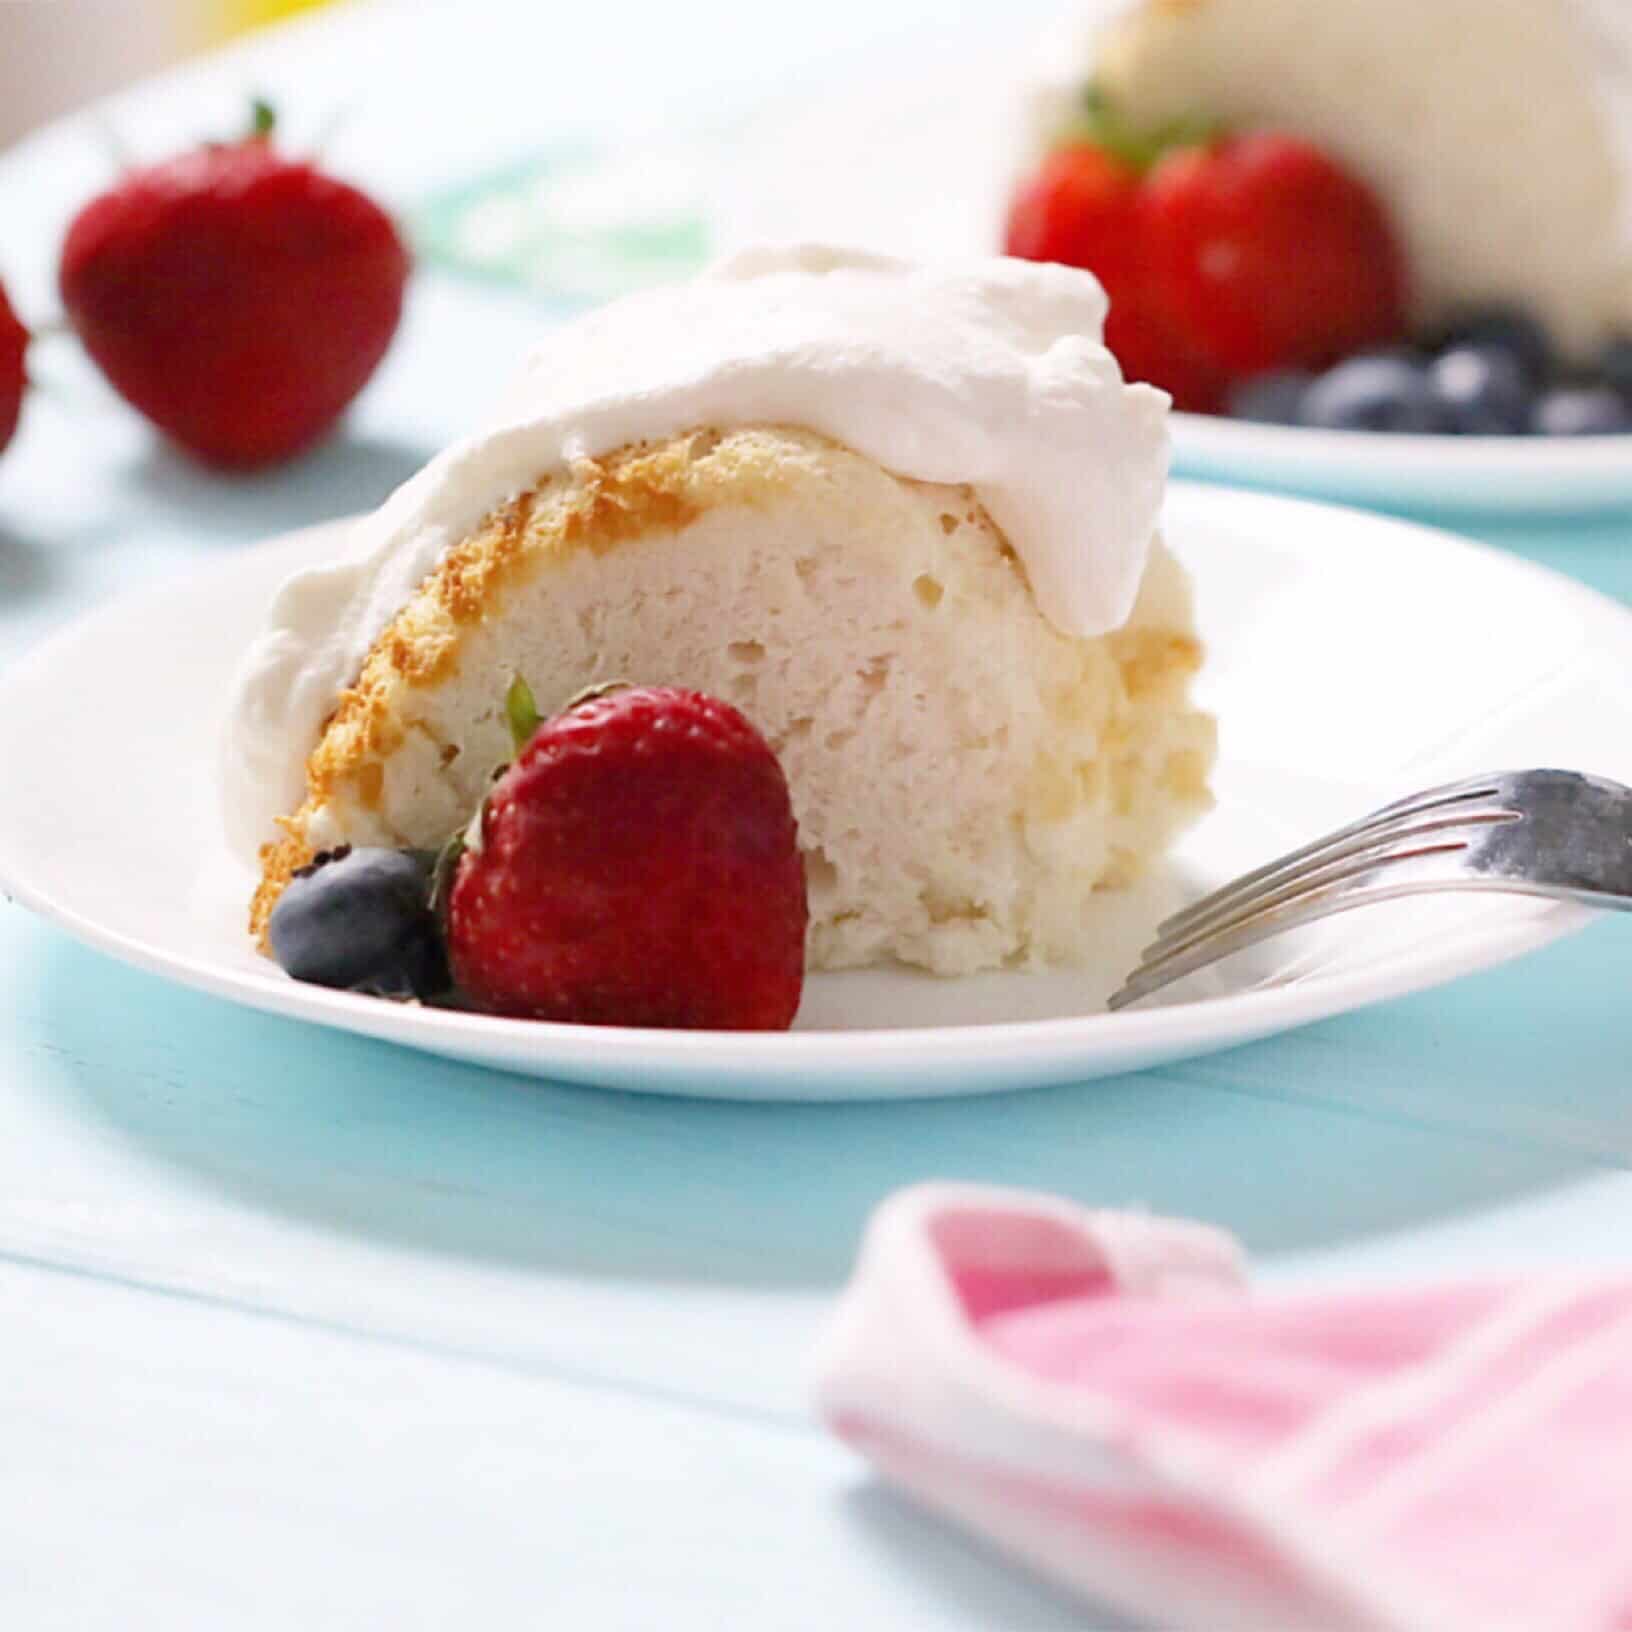 Coconut Angel Food Cake with Berries - Completely Delicious